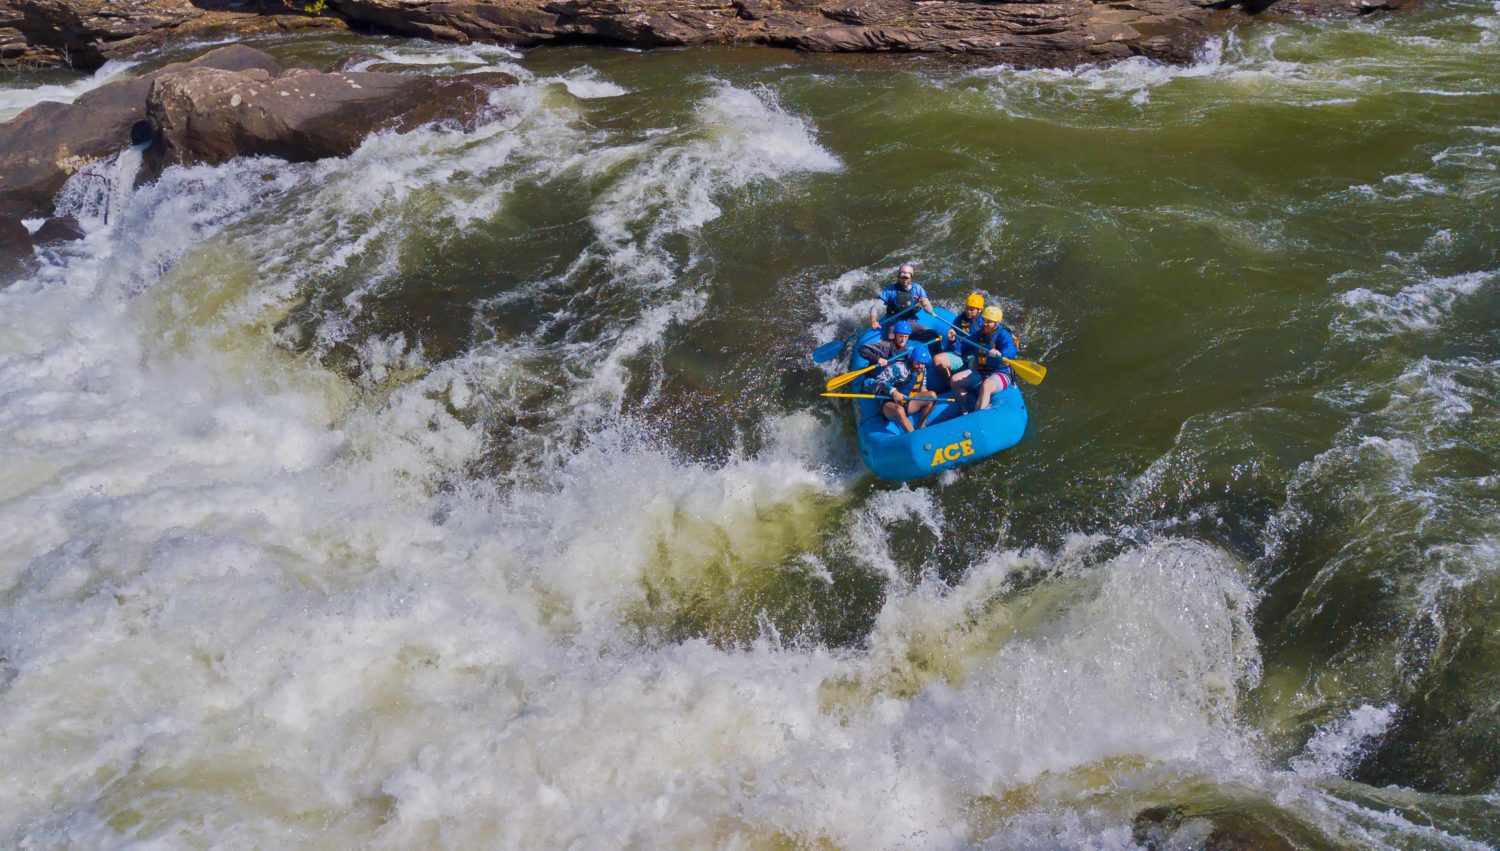 A raft drops over the 14' waterfall called Sweet's Falls on the Upper Gauley River in West Virginia.